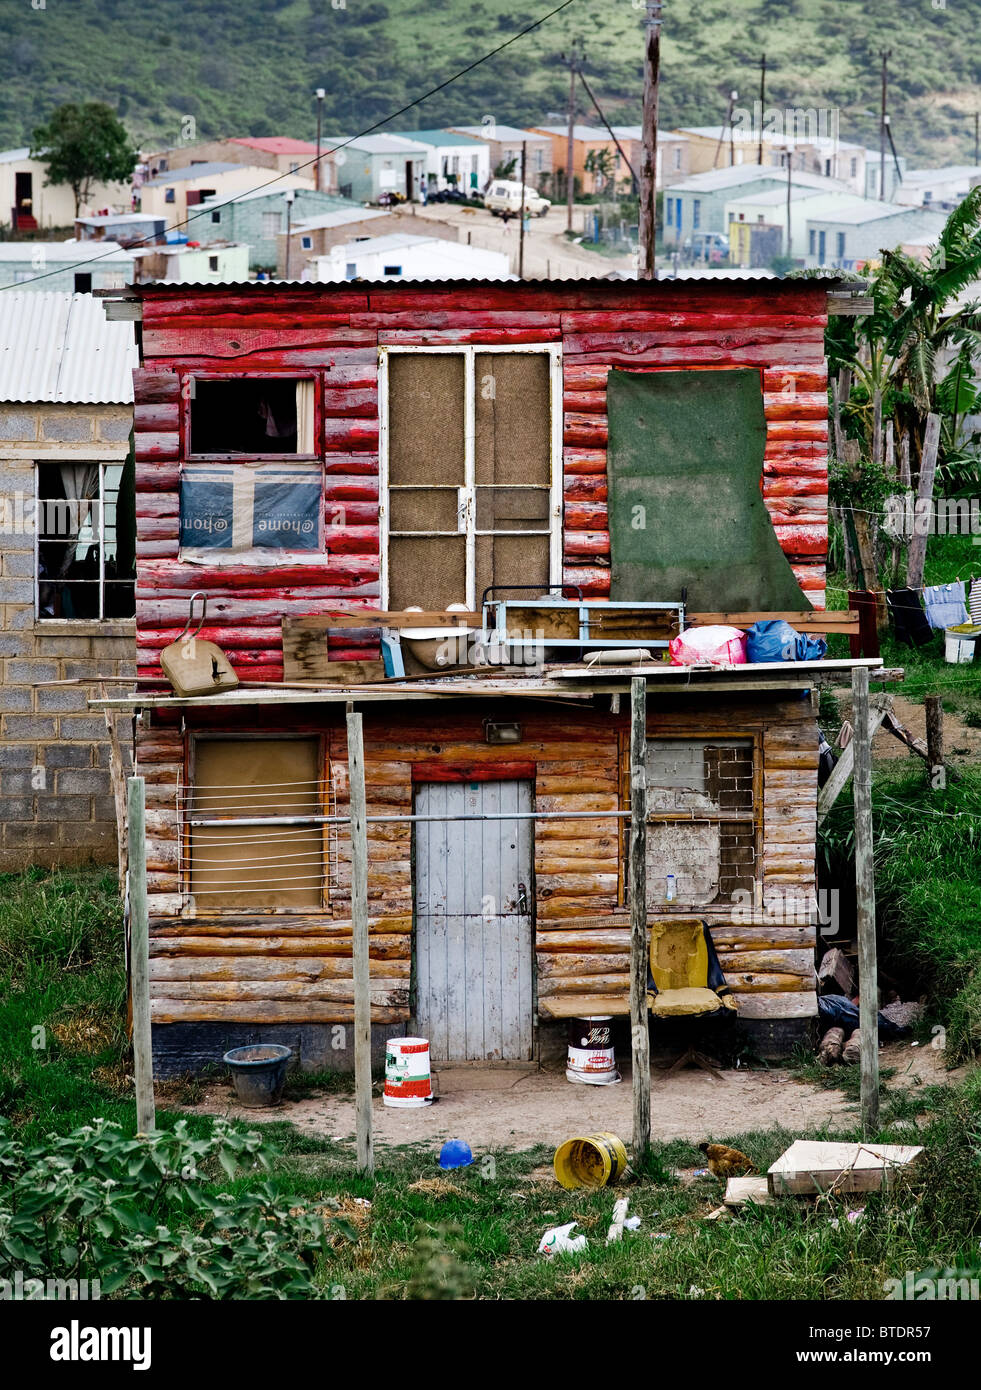 A double story shack in the informal settlement of Nompumulelo Stock Photo